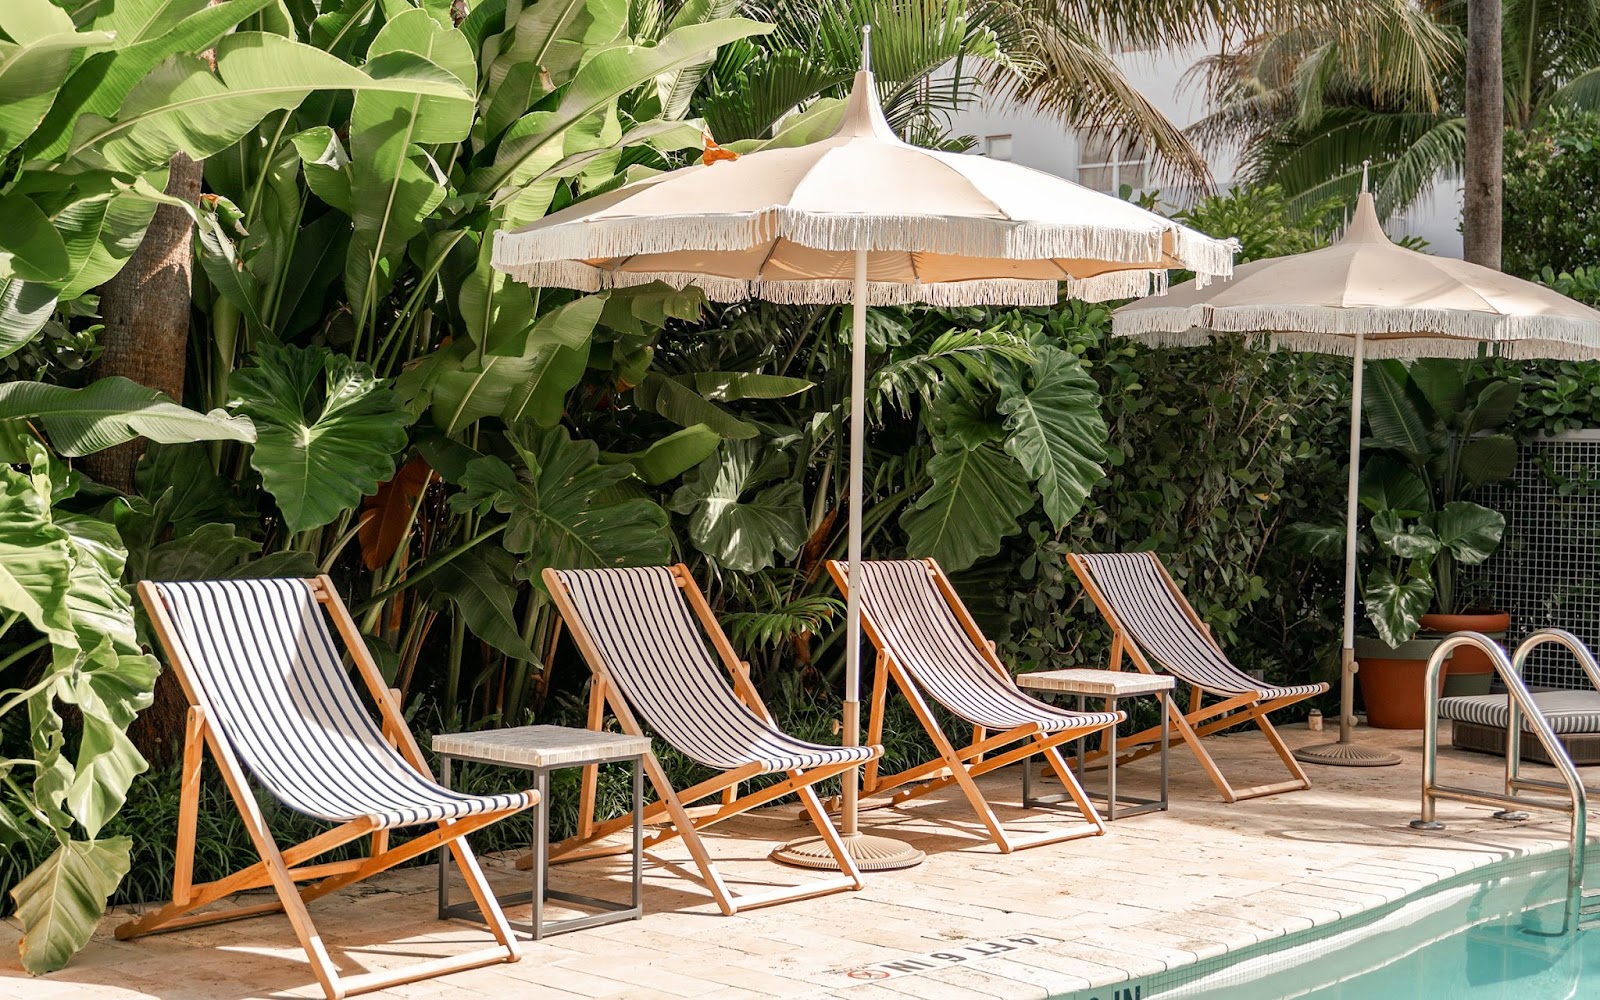 wooden sling chairs set up by pool shaded by patio umbrellas